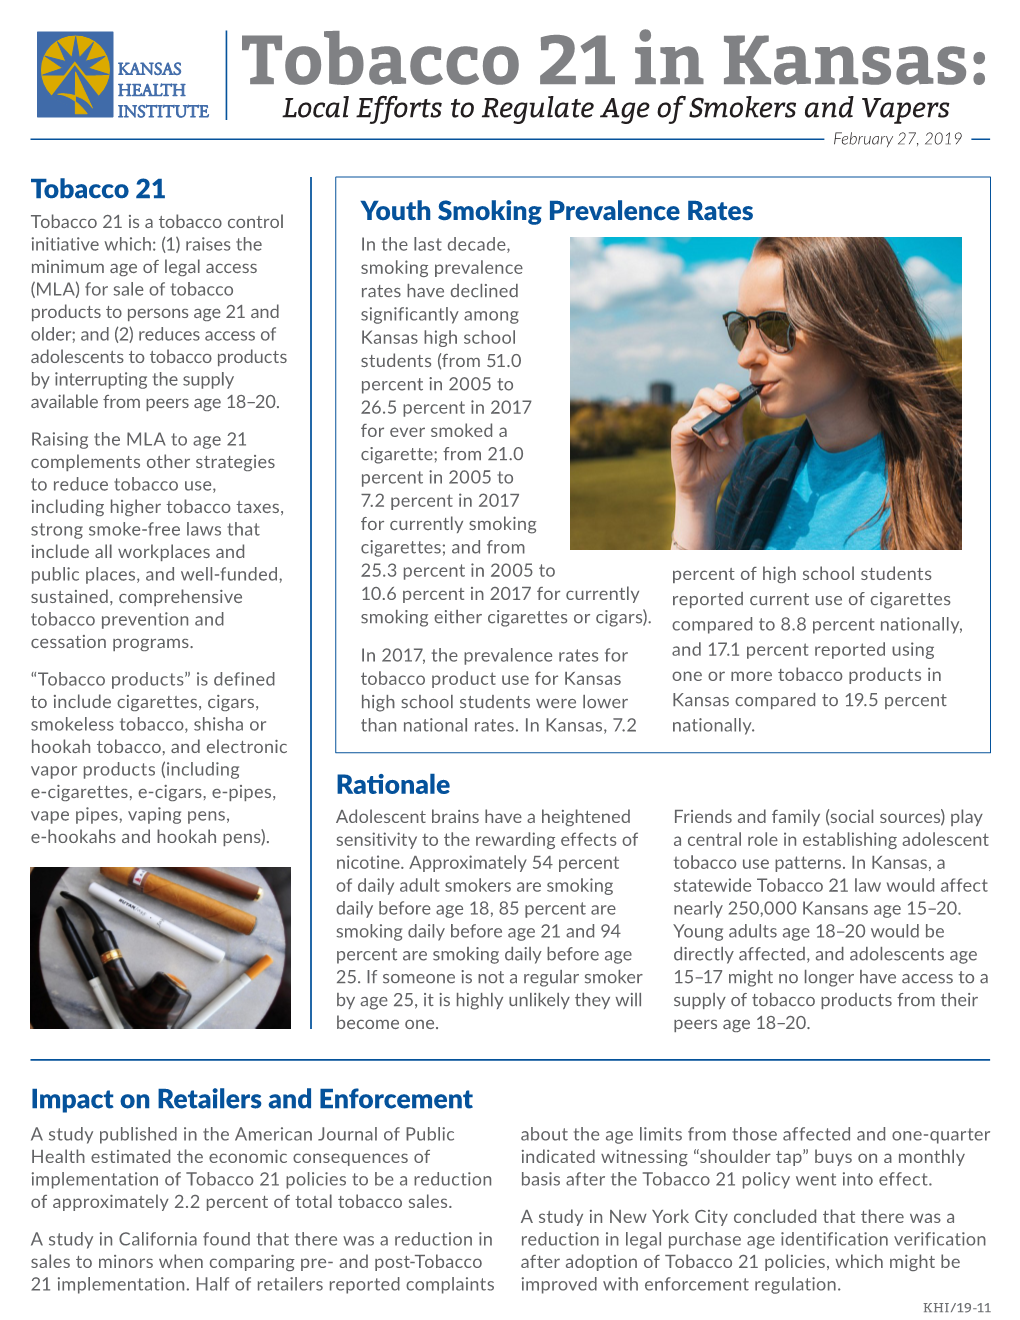 Tobacco 21 in Kansas: Local Efforts to Regulate Age of Smokers and Vapers Informing Policy